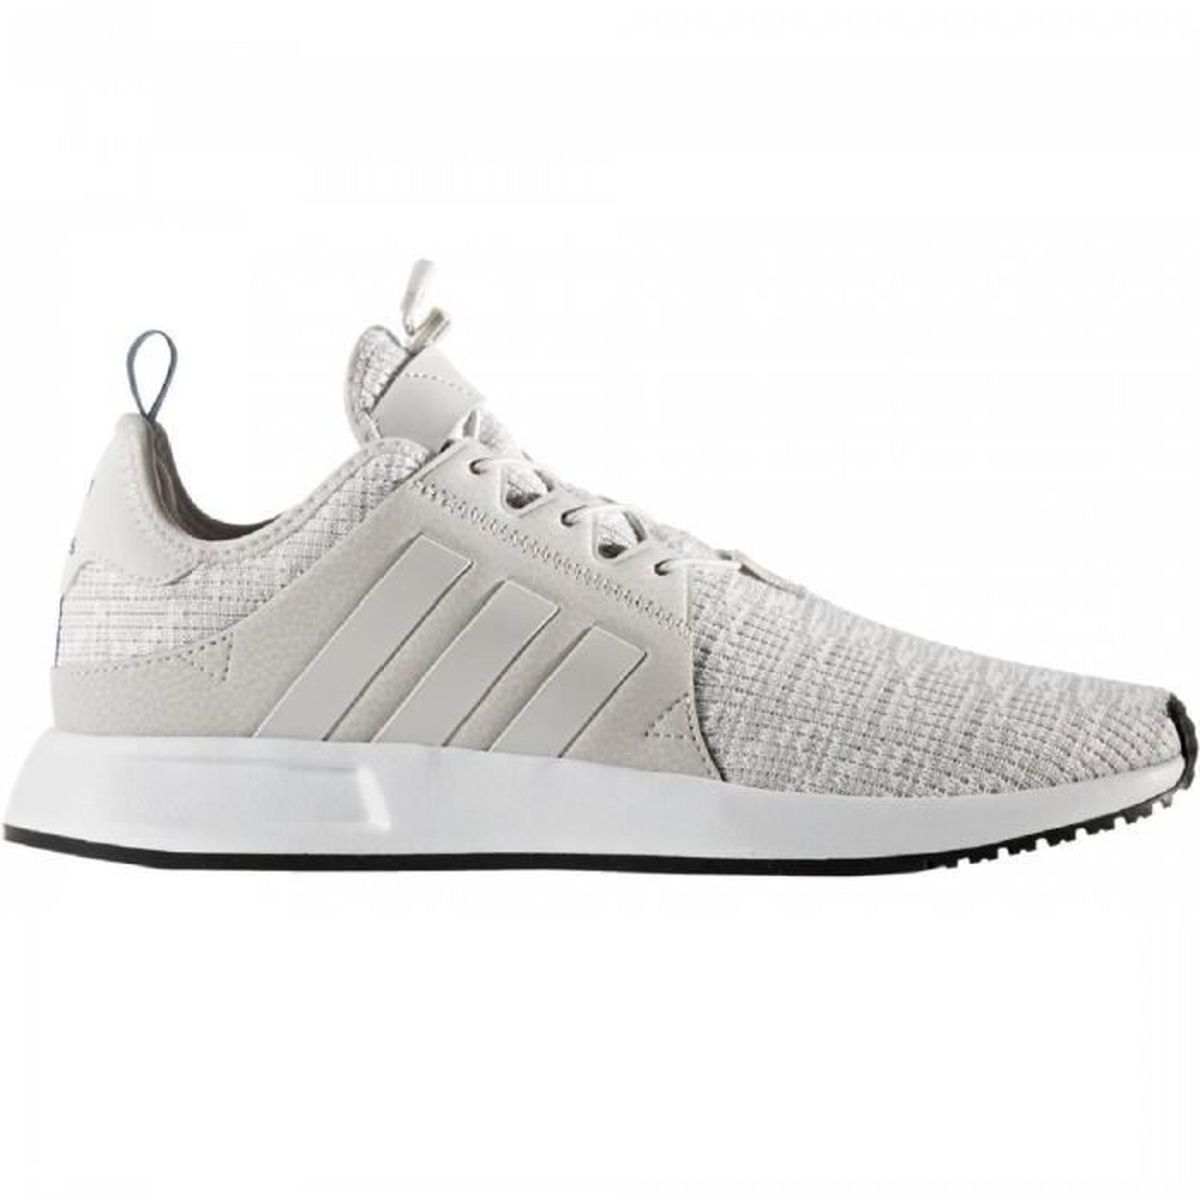 adidas homme chaussures toile